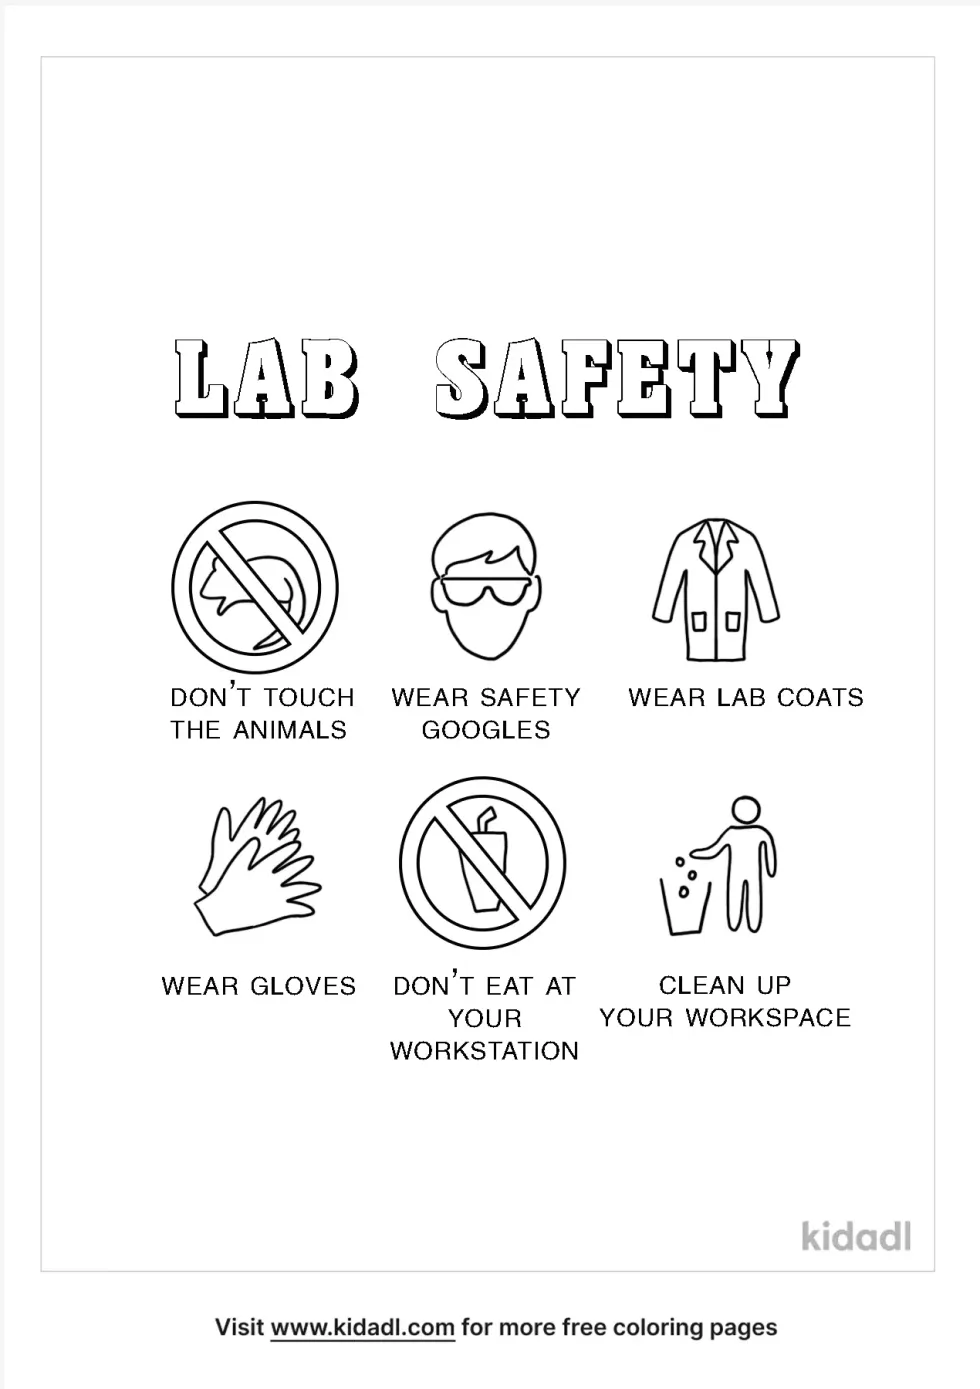 Safety Lab Rules